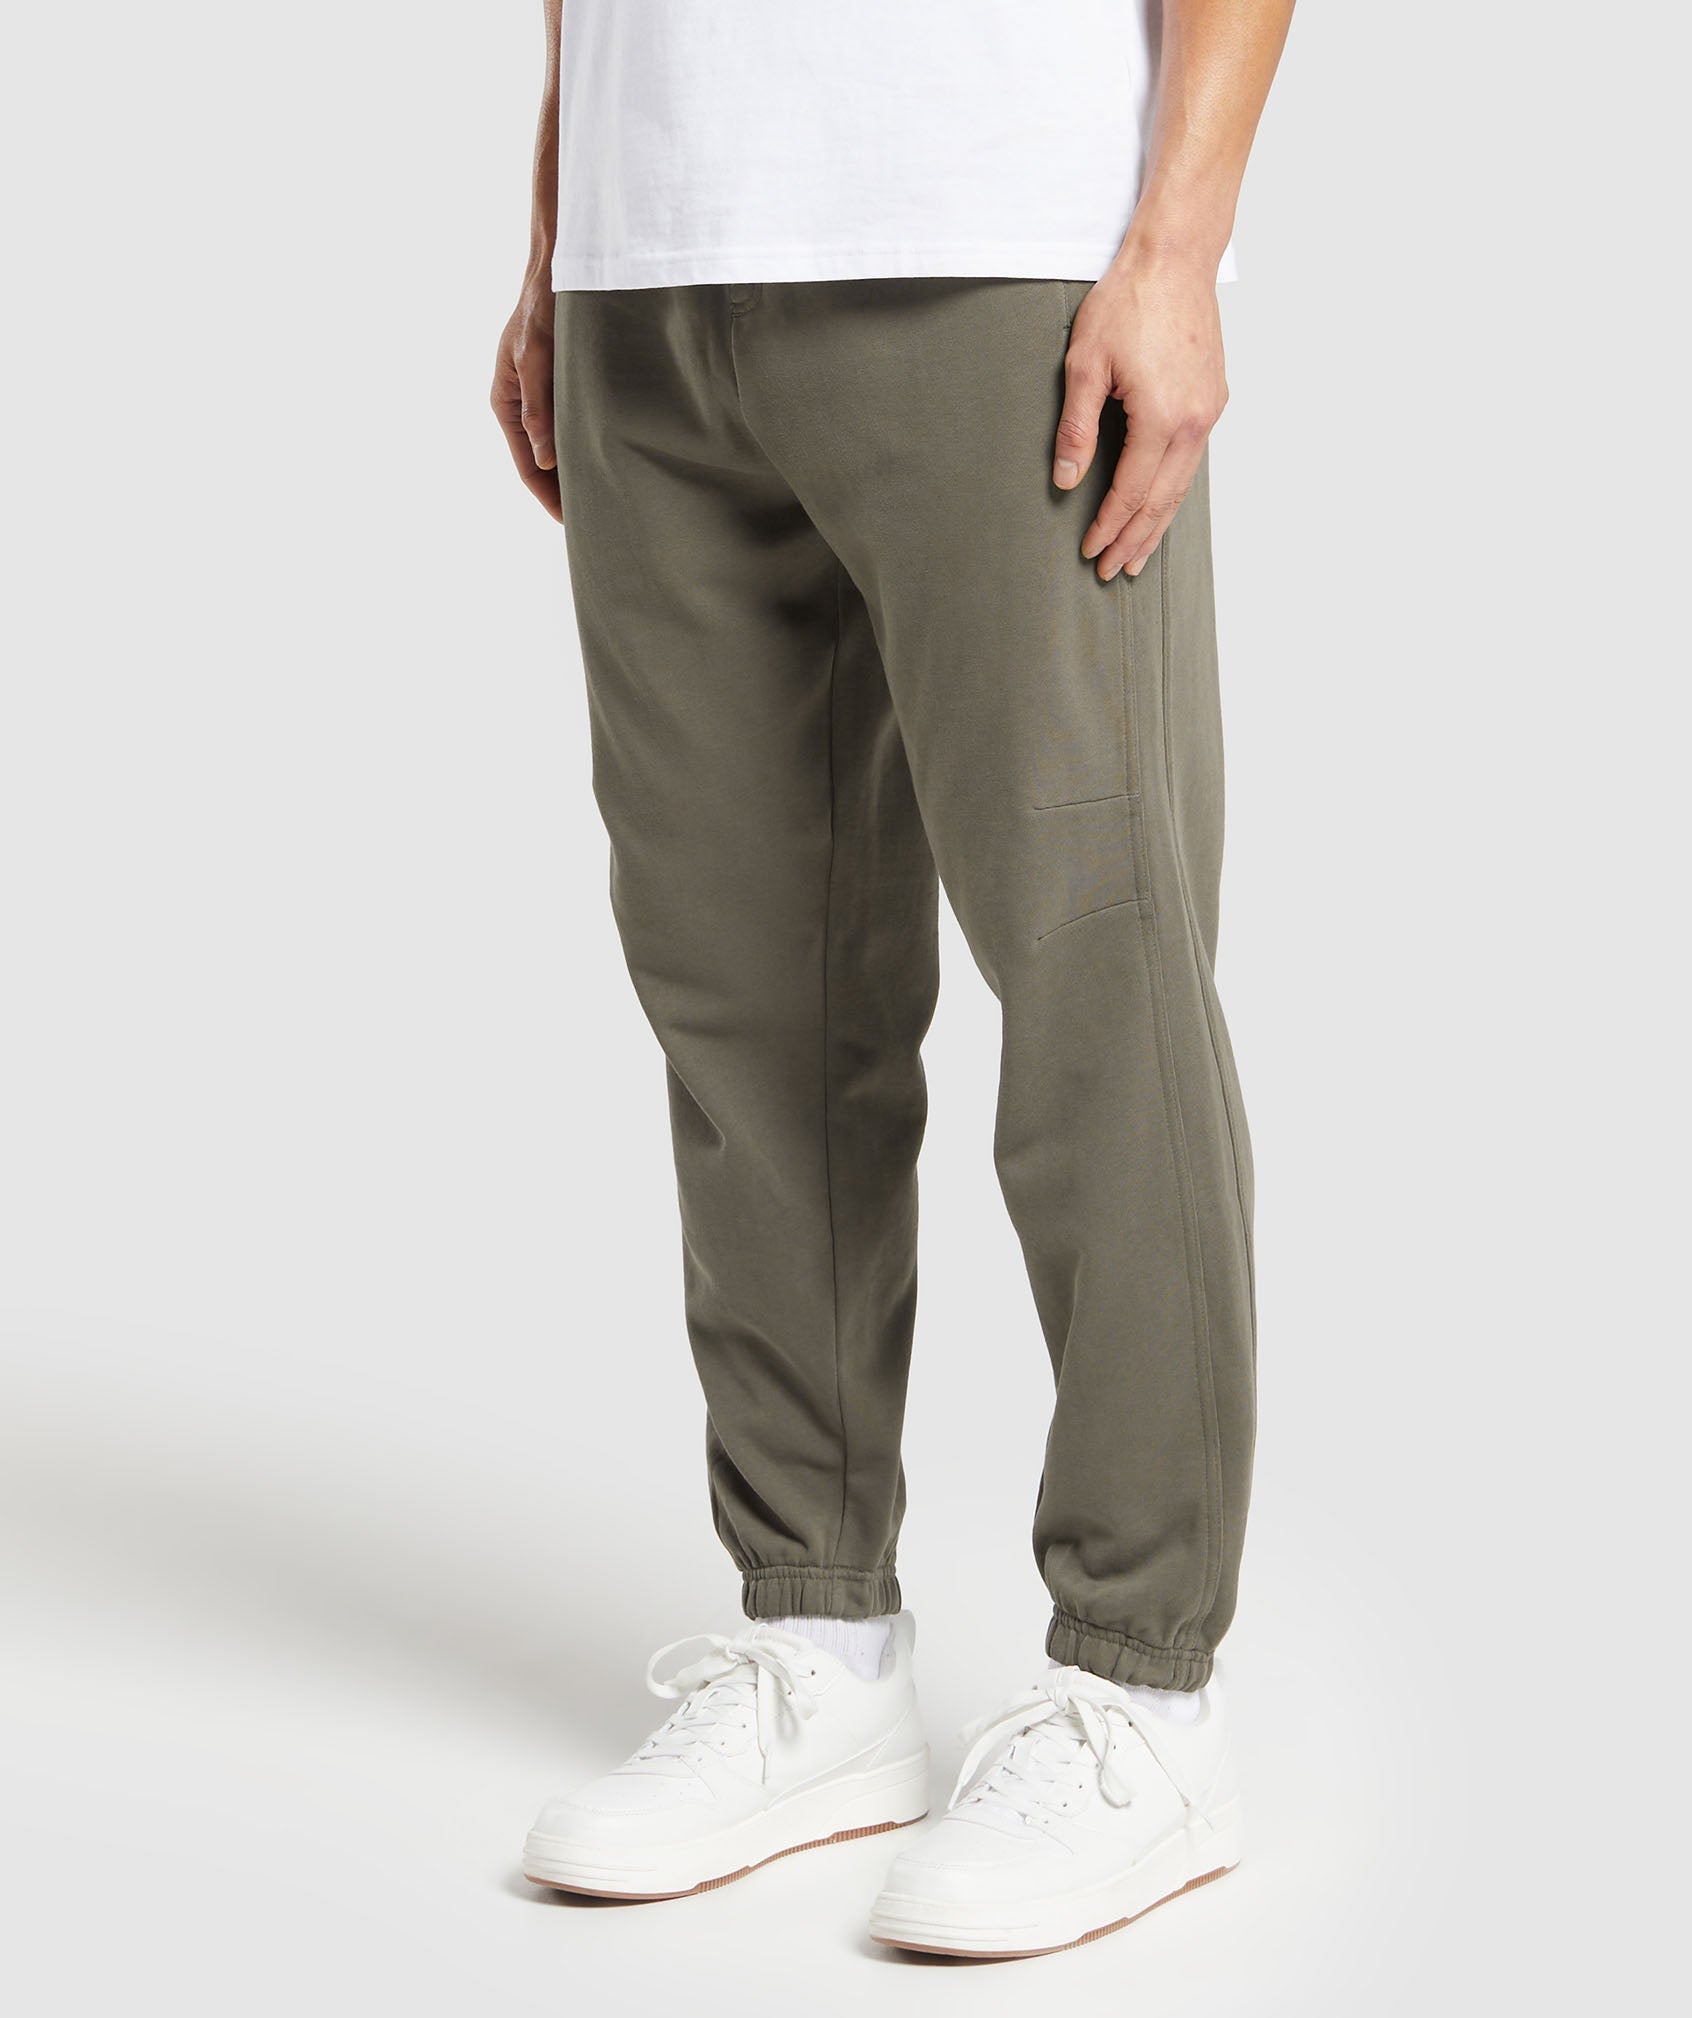 Rest Day Essentials Joggers in Camo Brown - view 3